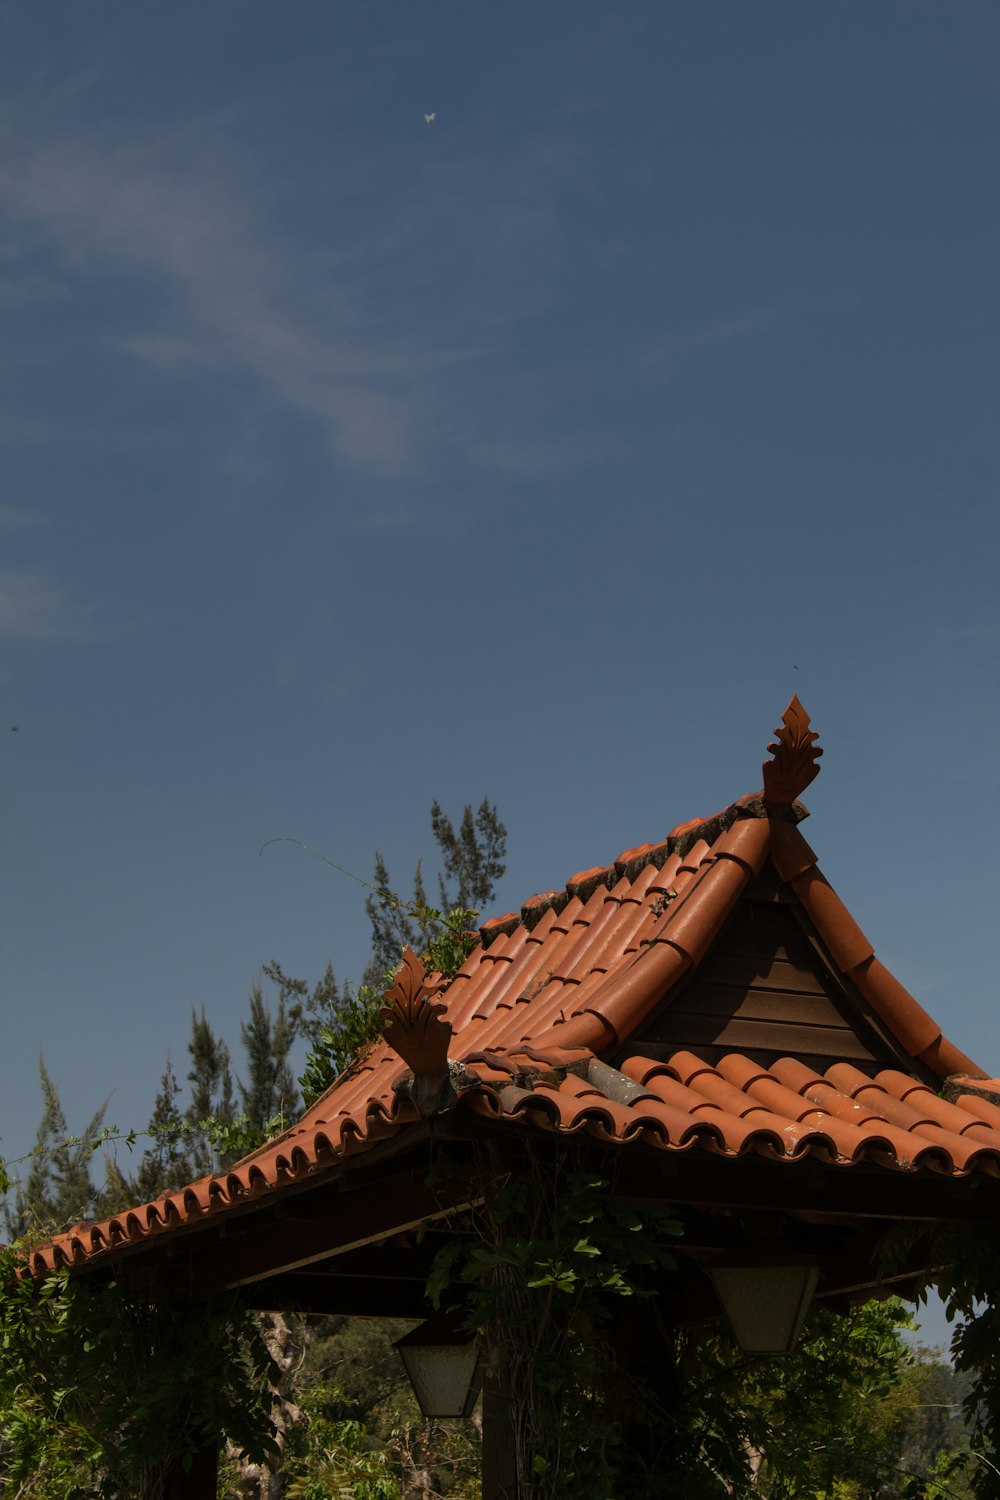 brown roof under blue sky during daytime